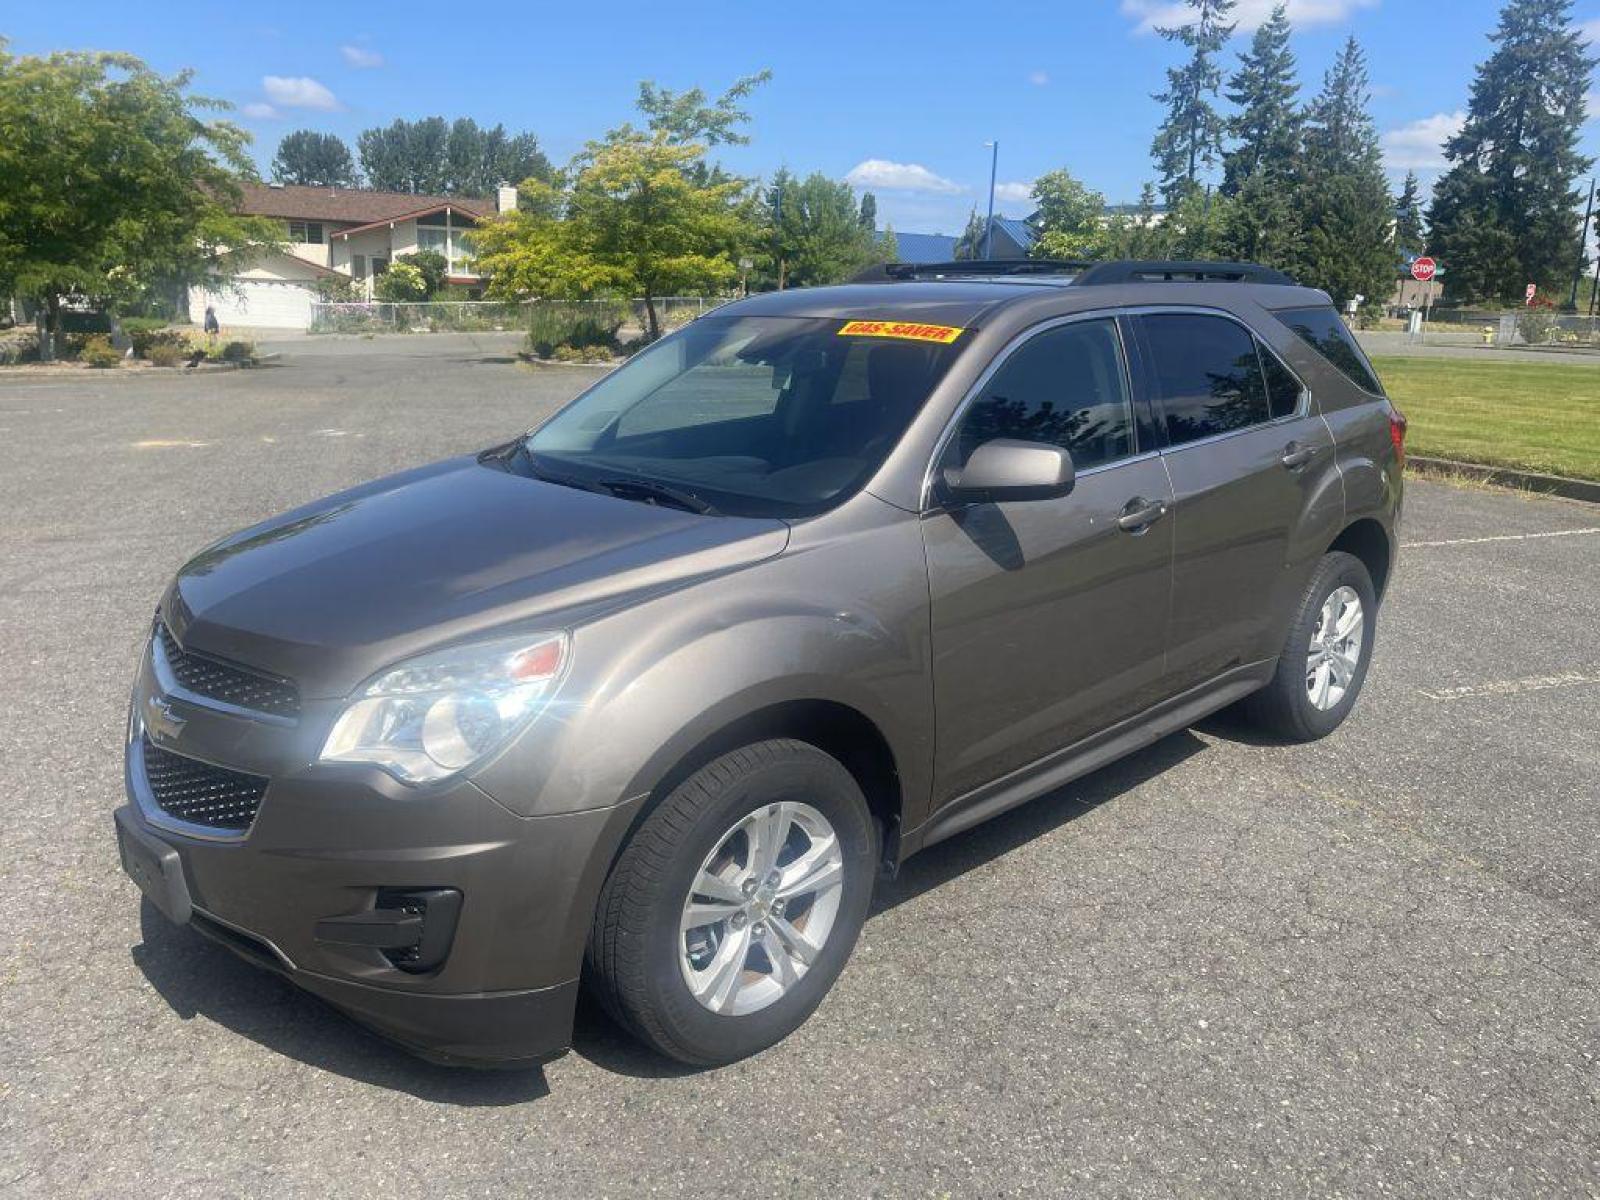 2012 GOLD /BLACK CHEVROLET EQUINOX LT SPRT UTILITY FLEX FUEL (2GNFLEEK2C6) with an 2.4L engine, Automatic transmission, located at 1505 S 356th St., Federal Way, WA, 98003, 47.282051, -122.314781 - Reduced price to $7,999!! Runs great! And will handle wonderful in the rain and PNW weather conditions during fall and winter! This Equinox is a great compact SUV with engaging handling and enough gusto for daily driving, but very good gas mileage with the Flex Fuel package. Very roomy five-sea - Photo #0